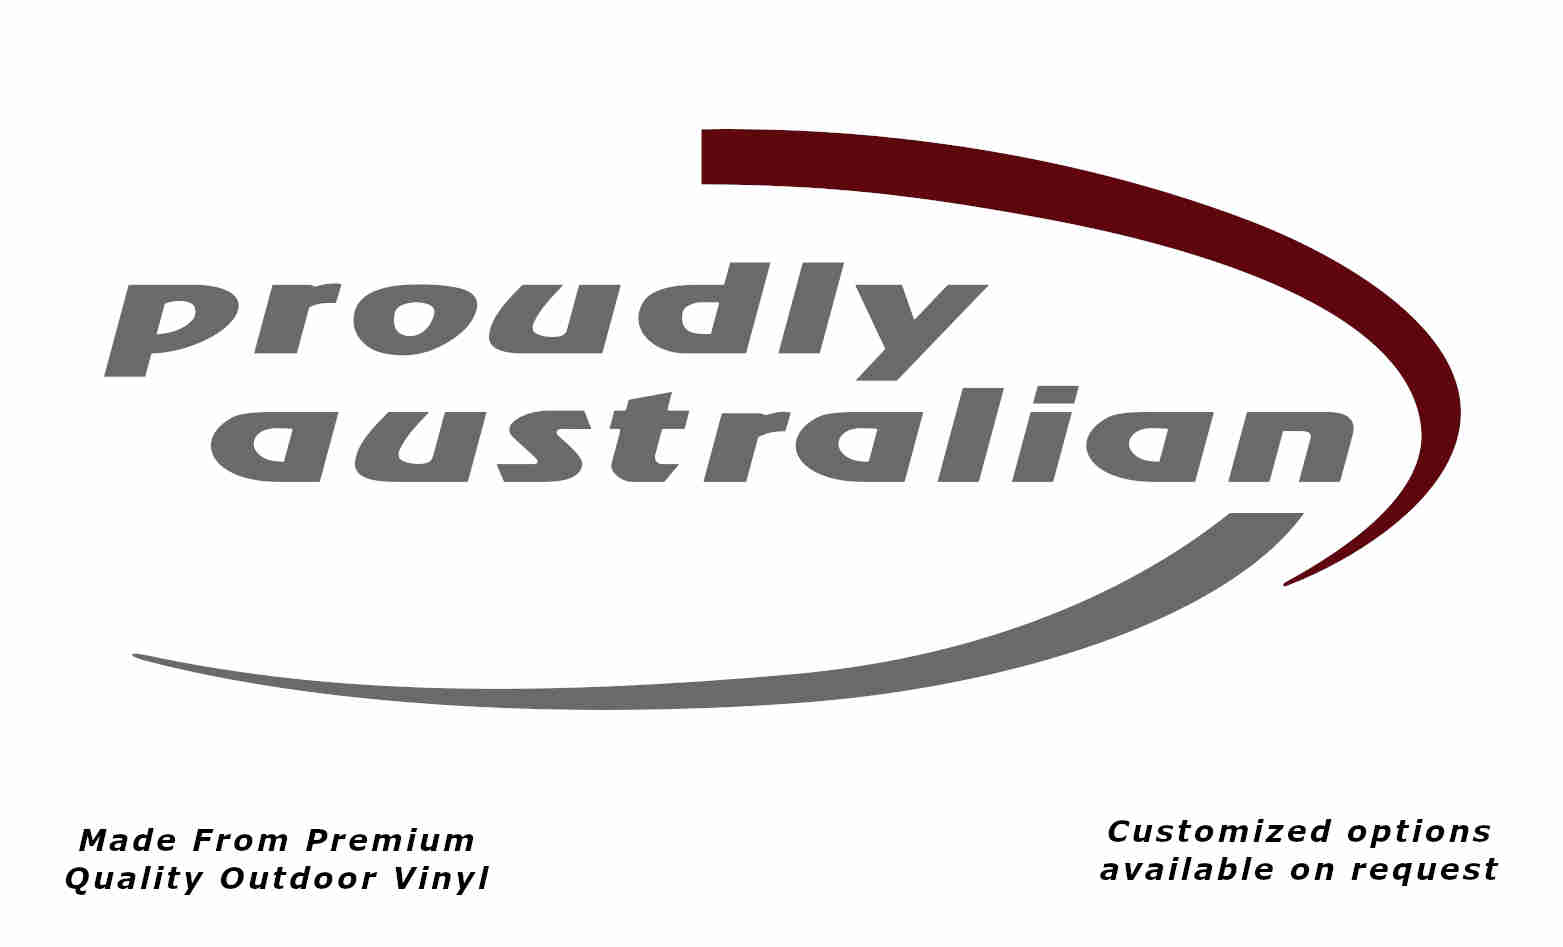 Avan proudly australian drivers side v1 caravan replacement vinyl decal sticker in silver grey and purple red.